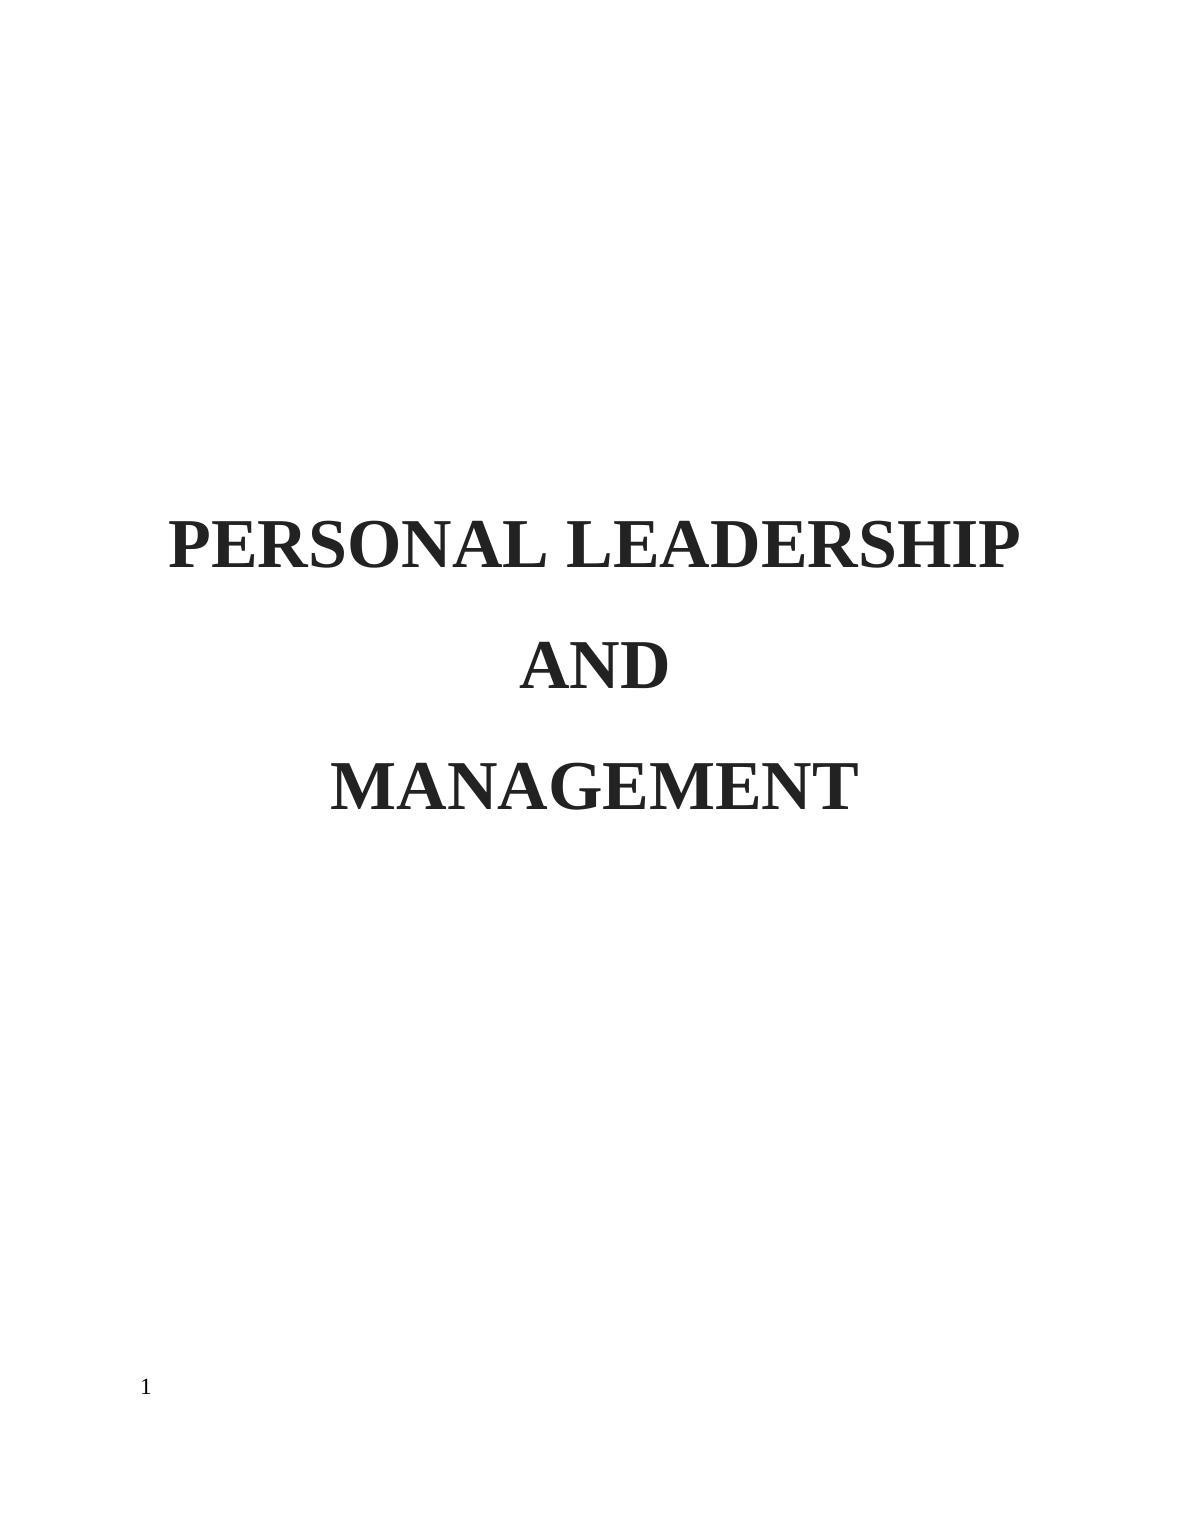 Assignment on Personal Leadership and Management_1